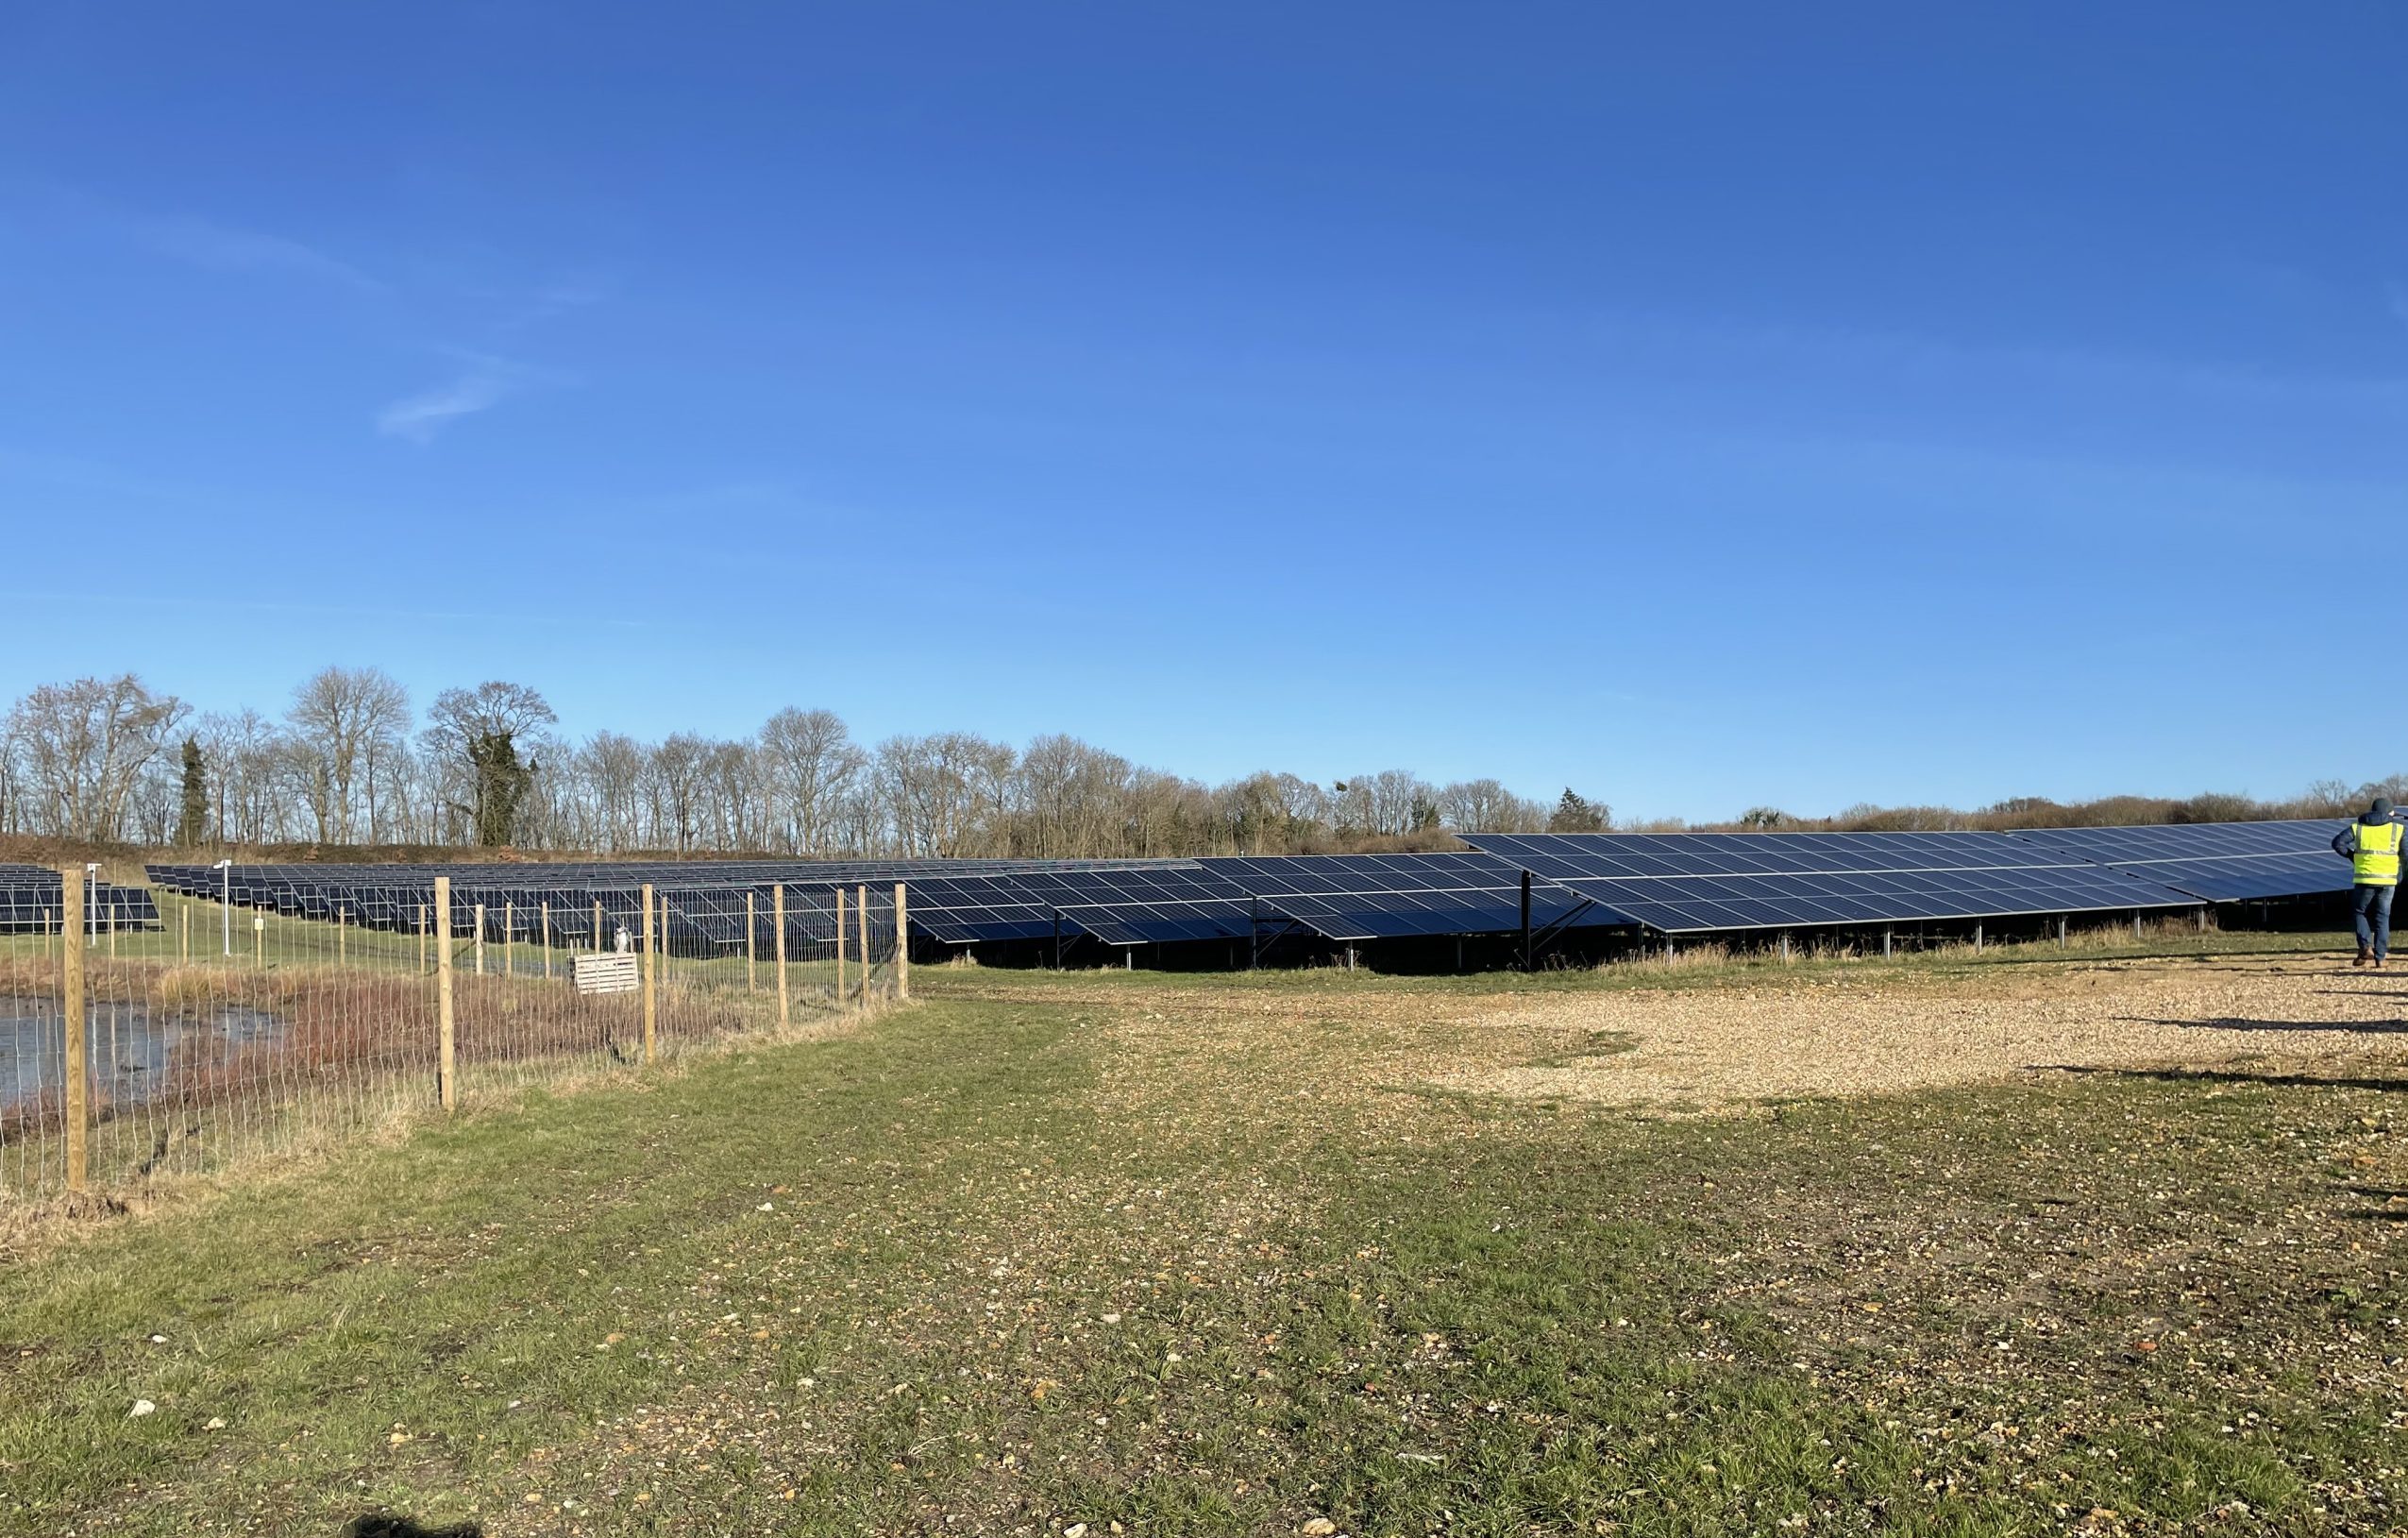 Hammer Warren Solar Farm, sited within the New Forest in Dorset.